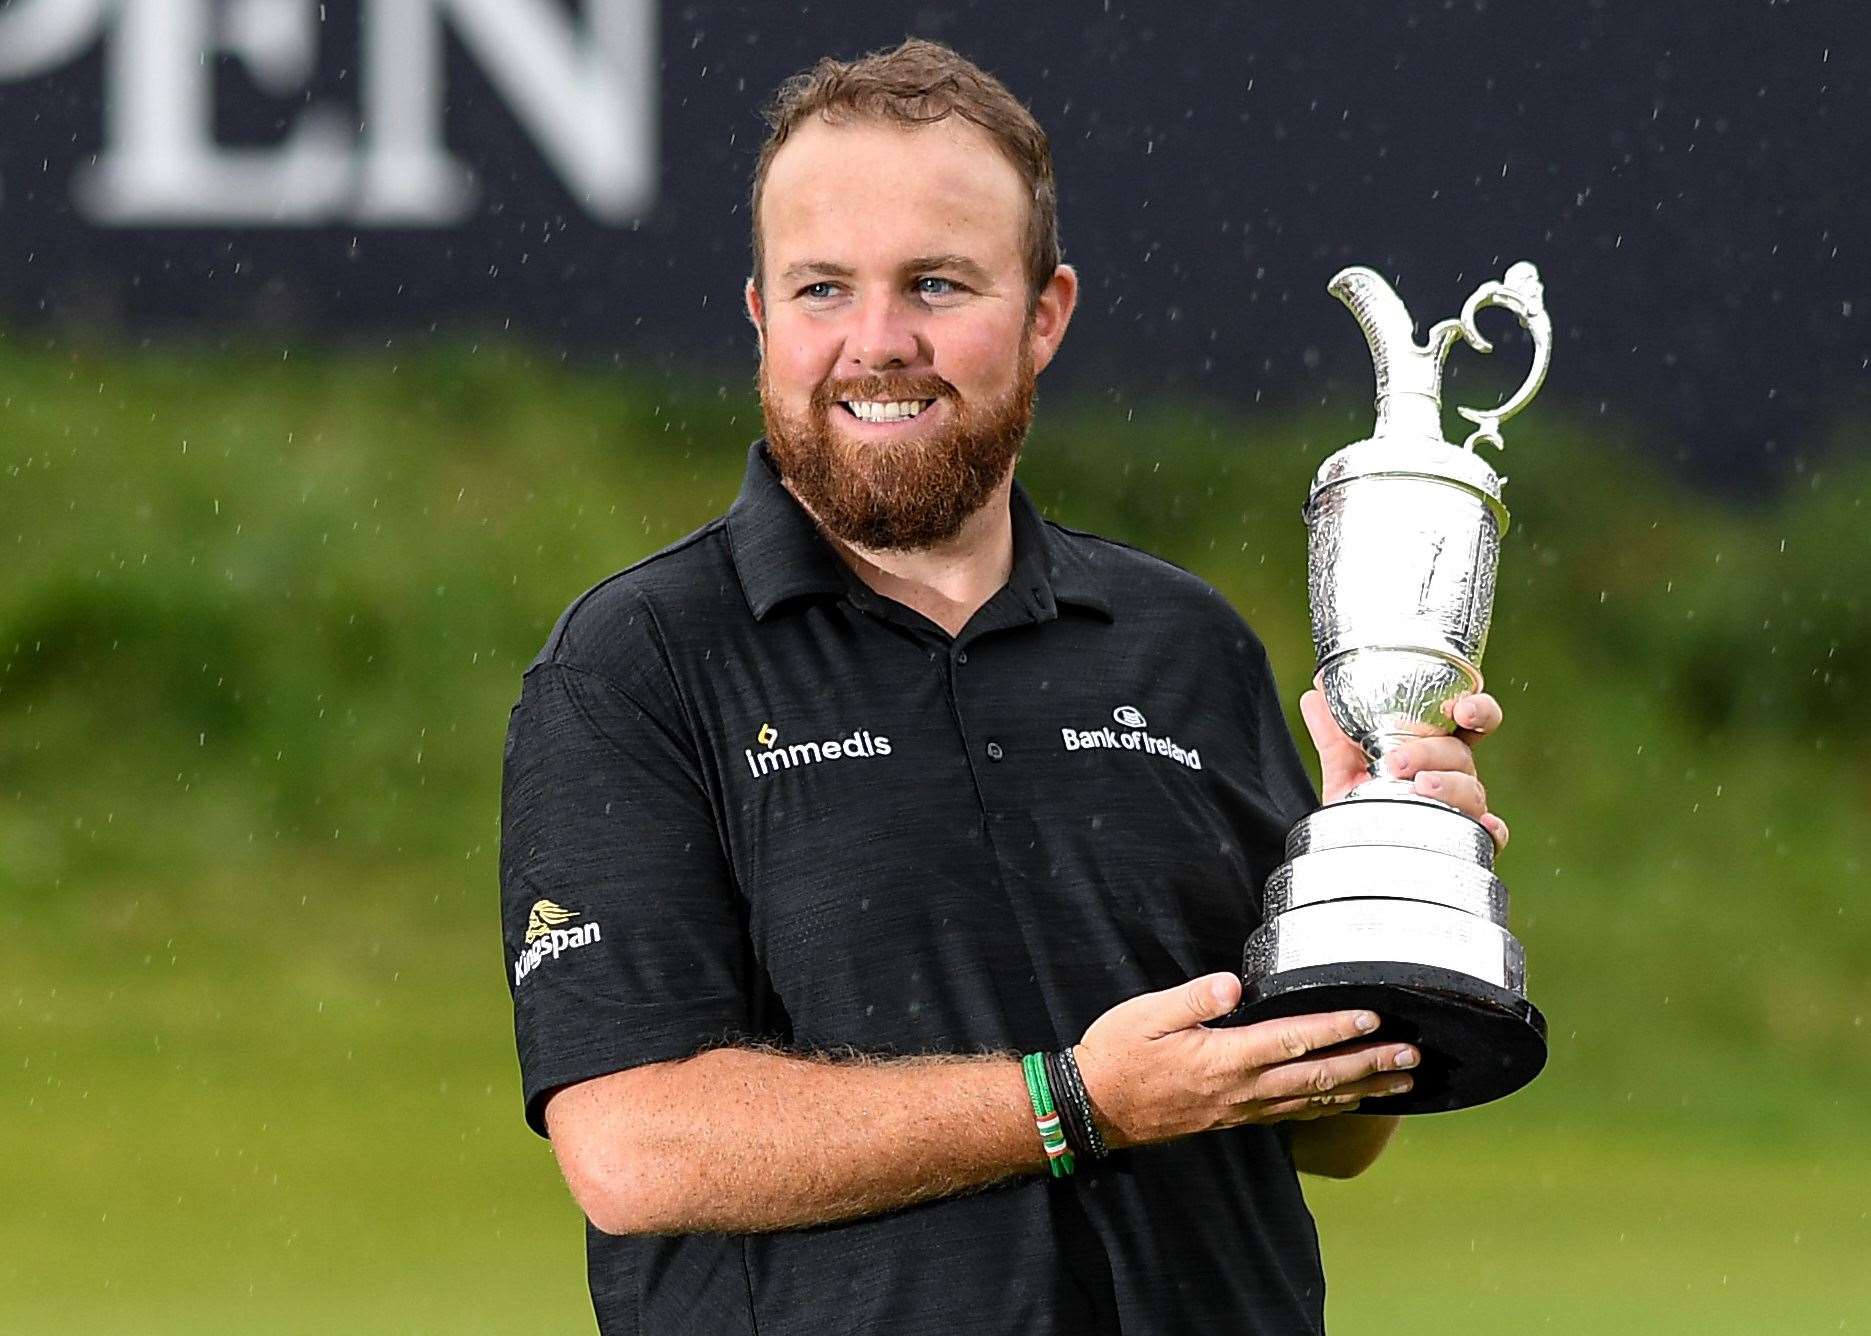 Ireland's Shane Lowry will be defending his 2019 title at Royal St George's next week. Picture: The R&A